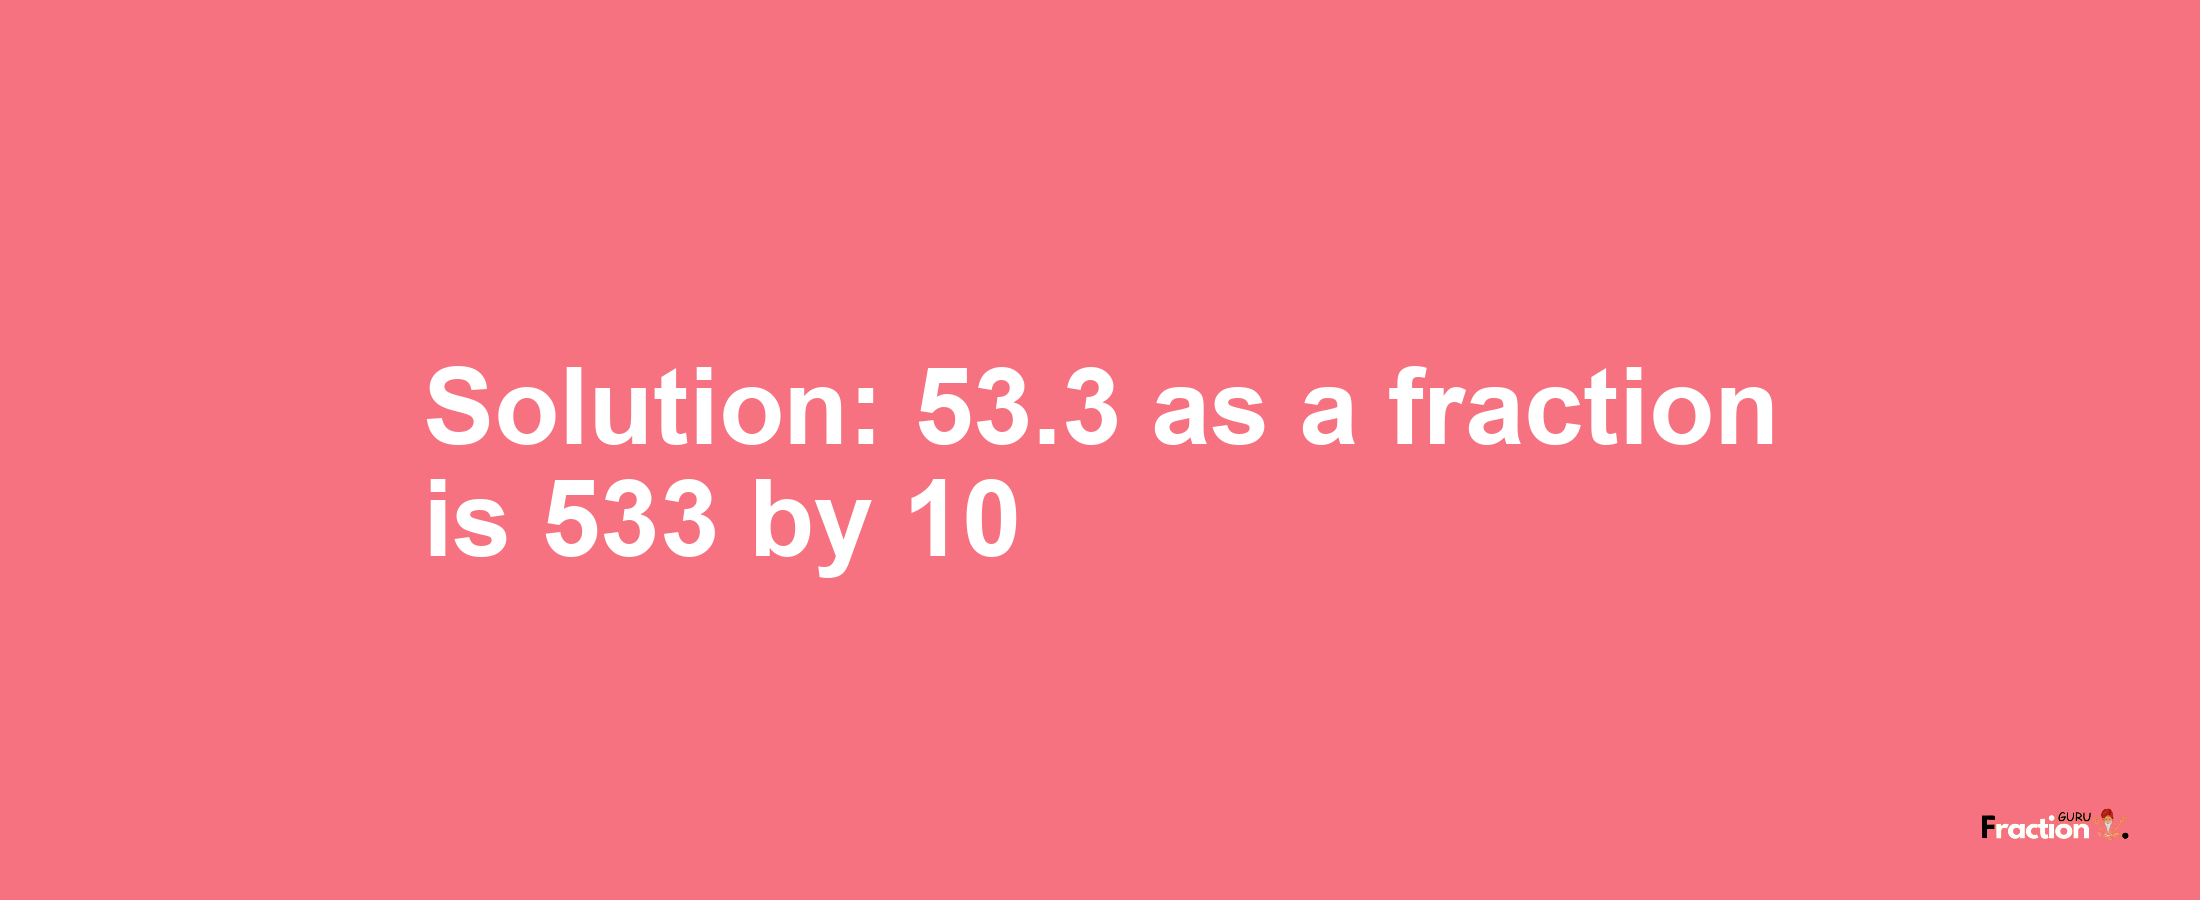 Solution:53.3 as a fraction is 533/10